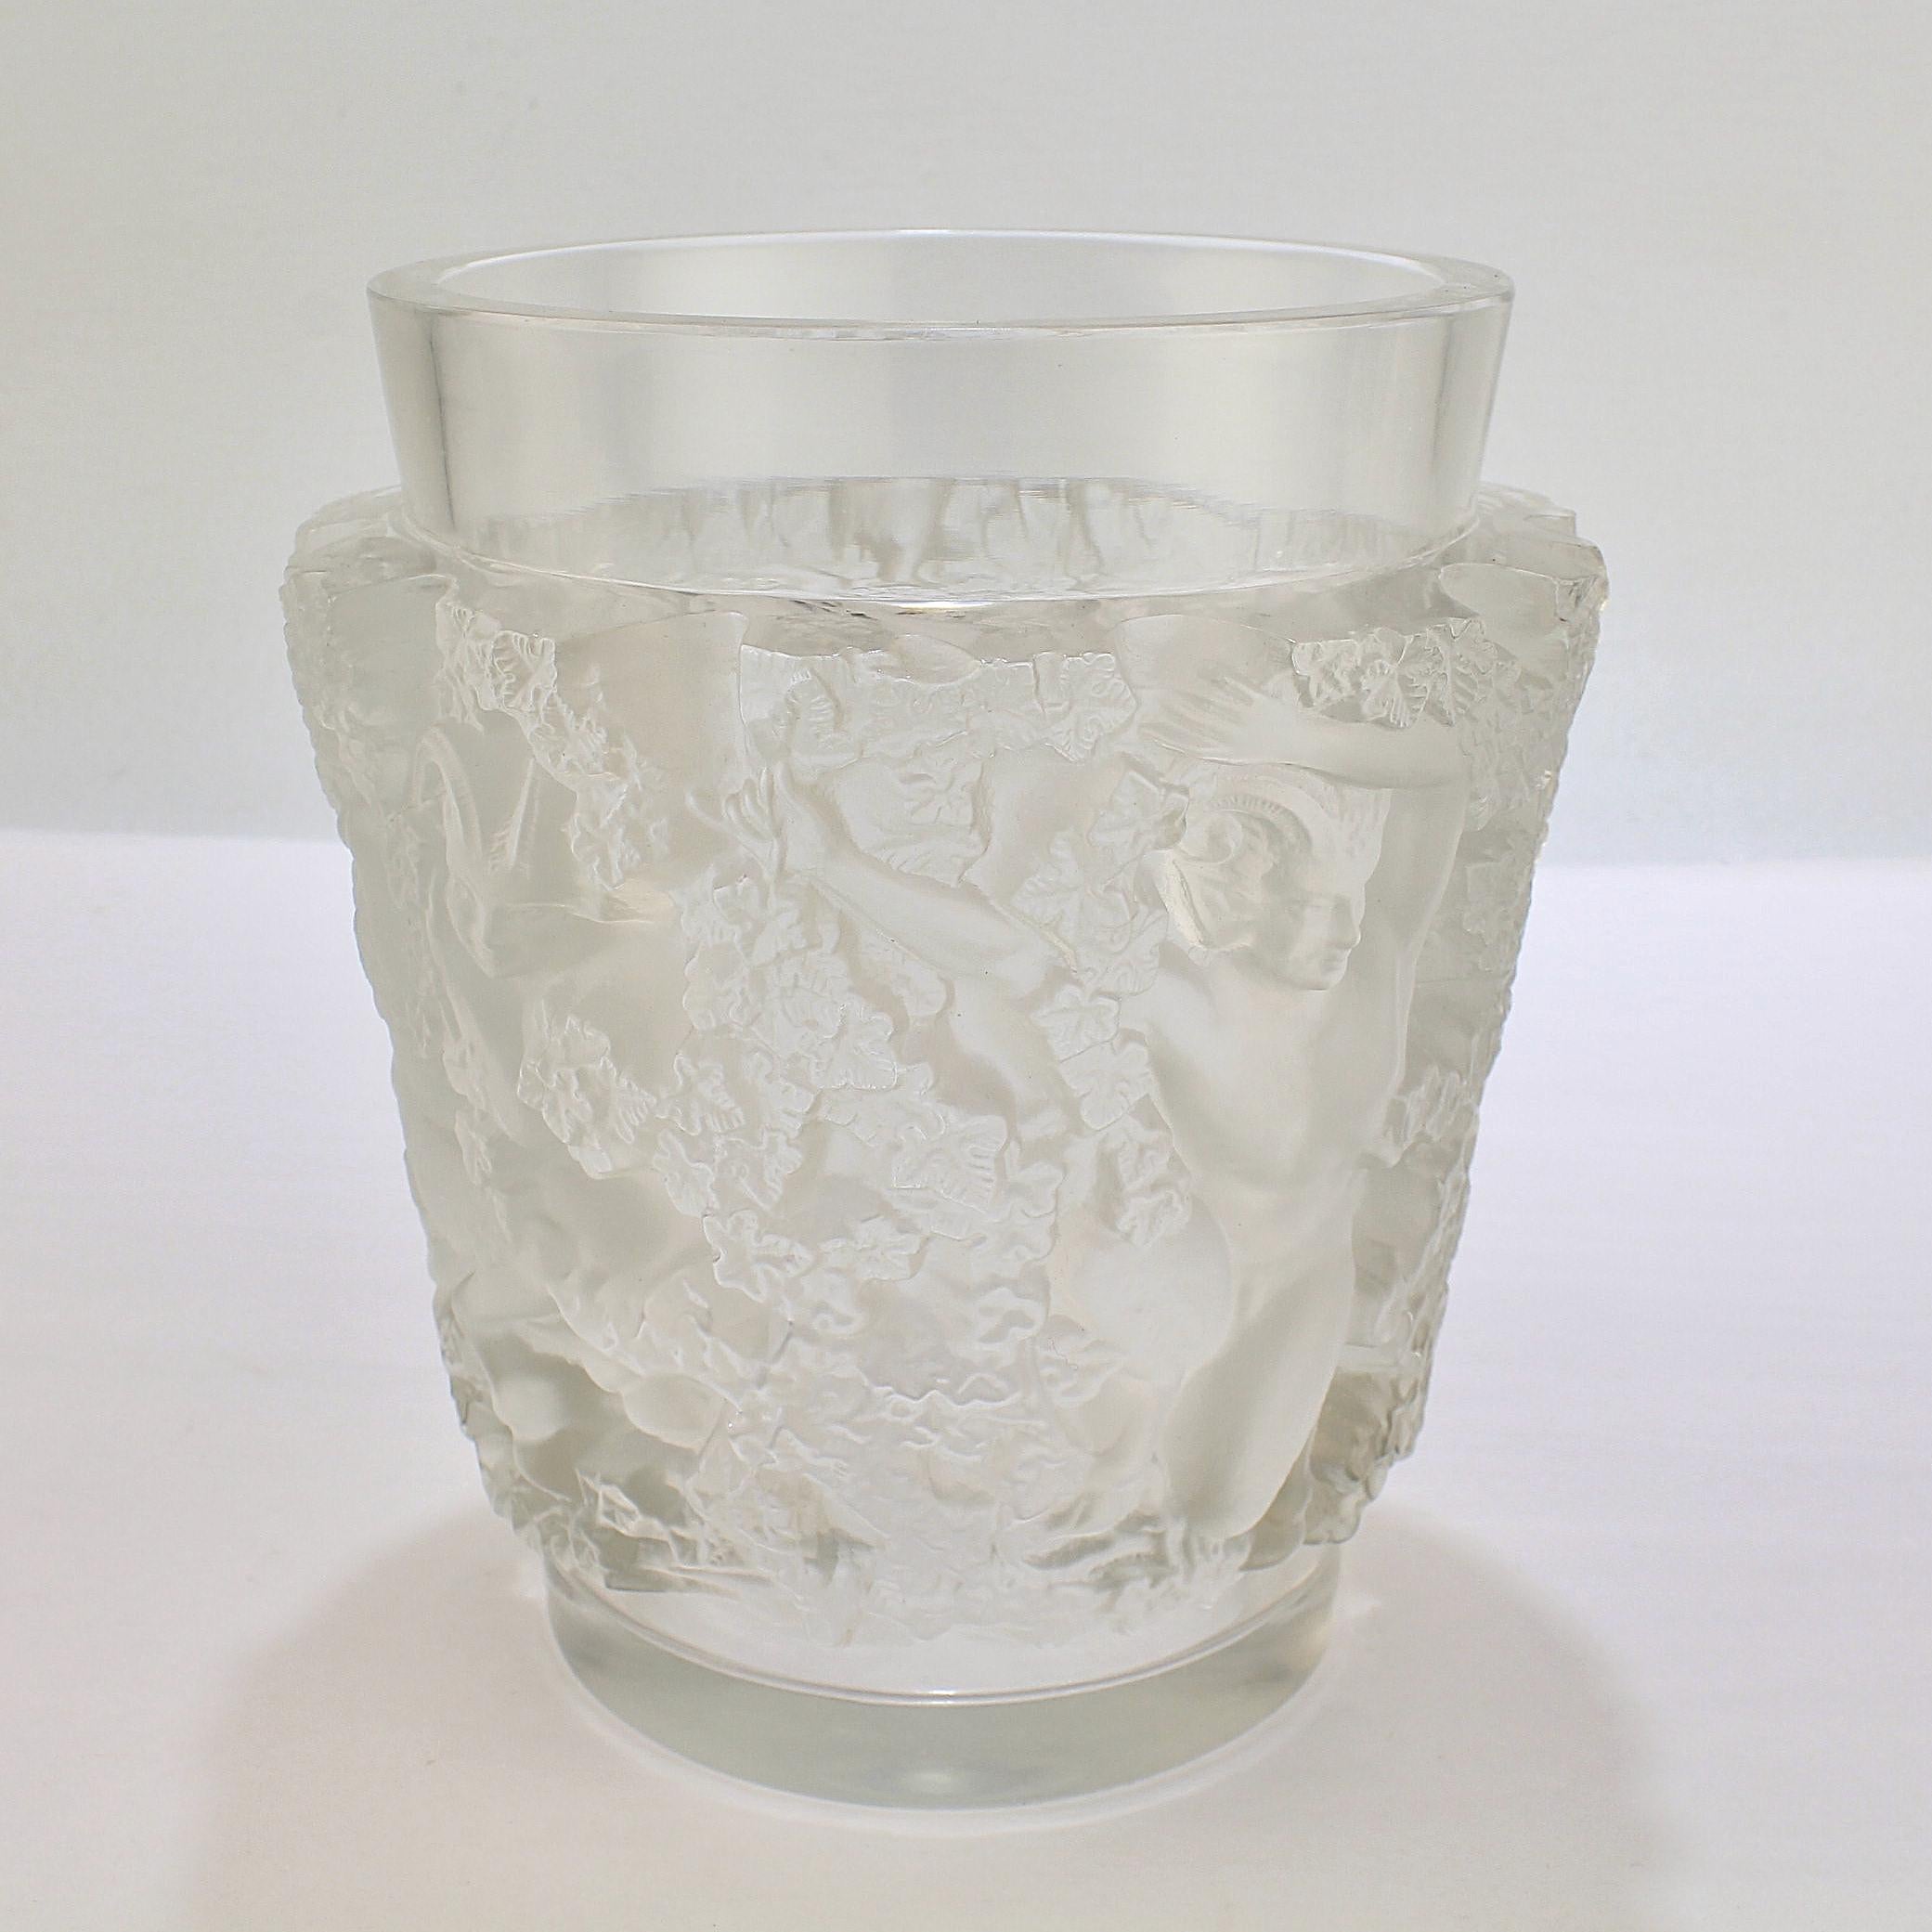 A fine Lalique French art glass vase. 

In the Bacchus pattern depicting satyrs hidden behind ivy.

Simply a wonderful Lalique vase!

Date:
Early to mid-20th century

Overall condition:
It is in overall good, as-pictured, used estate